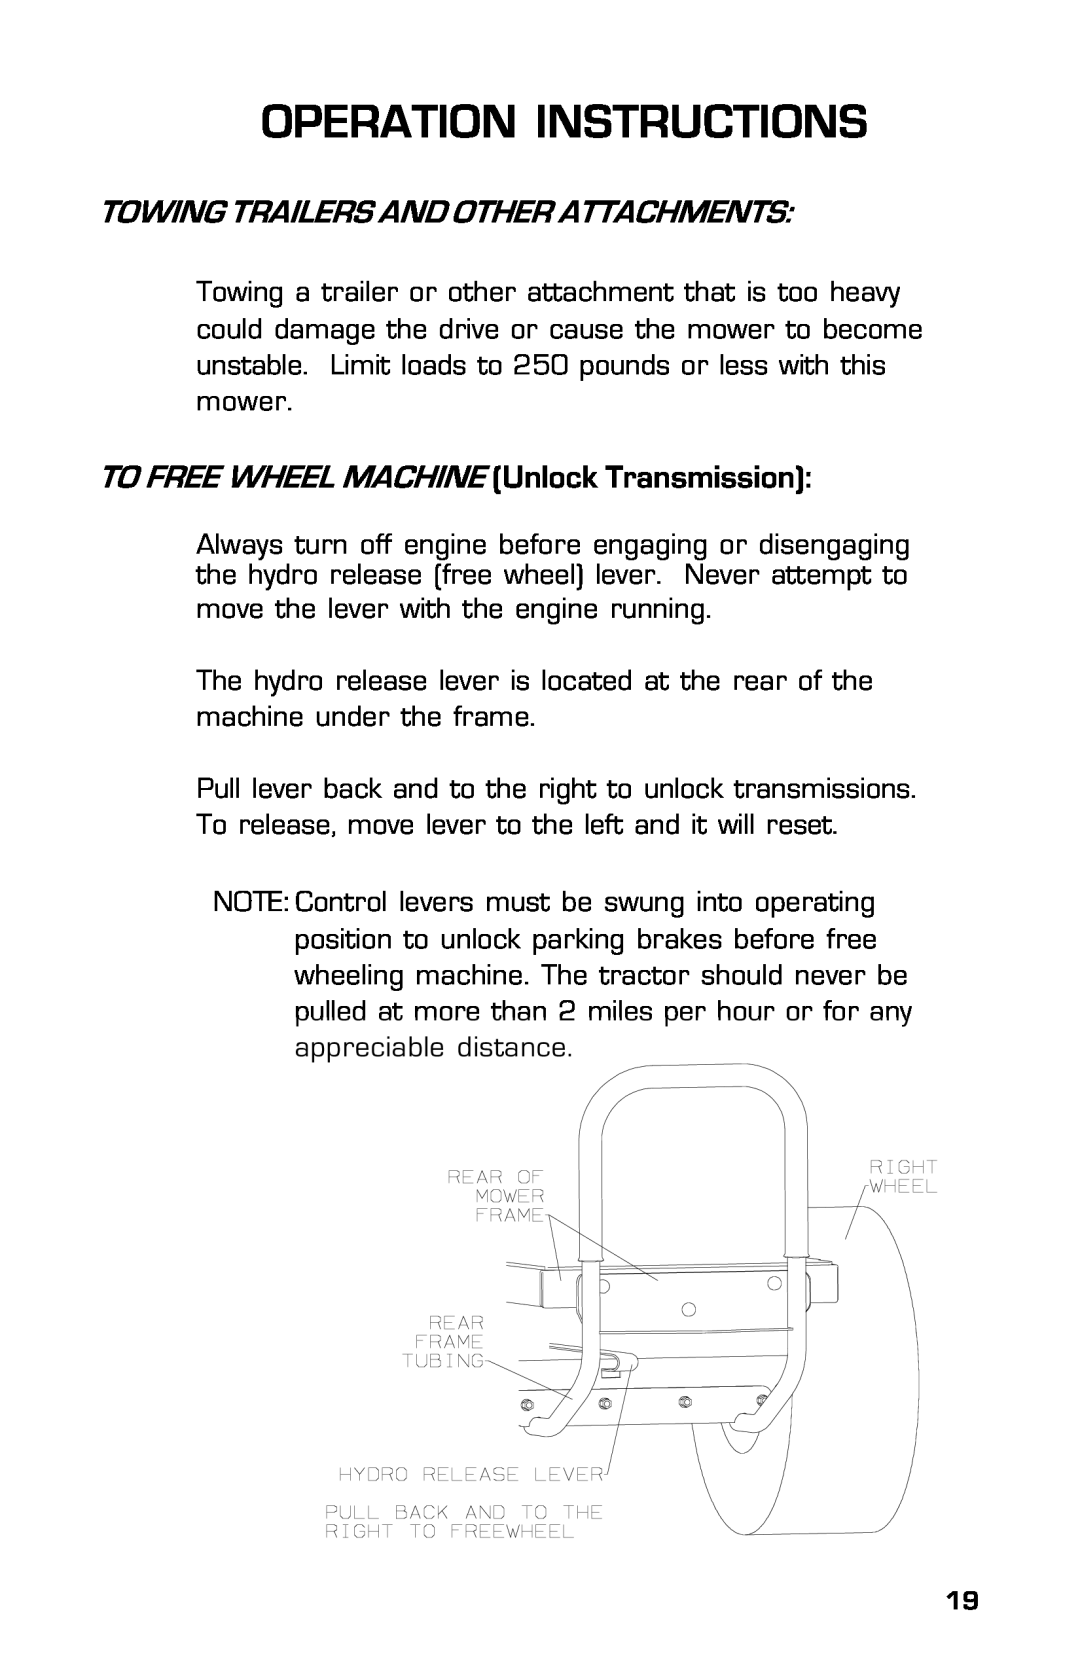 Dixon 3500 Series Operation Instructions, Towing Trailers And Other Attachments, TO FREE WHEEL MACHINE Unlock Transmission 